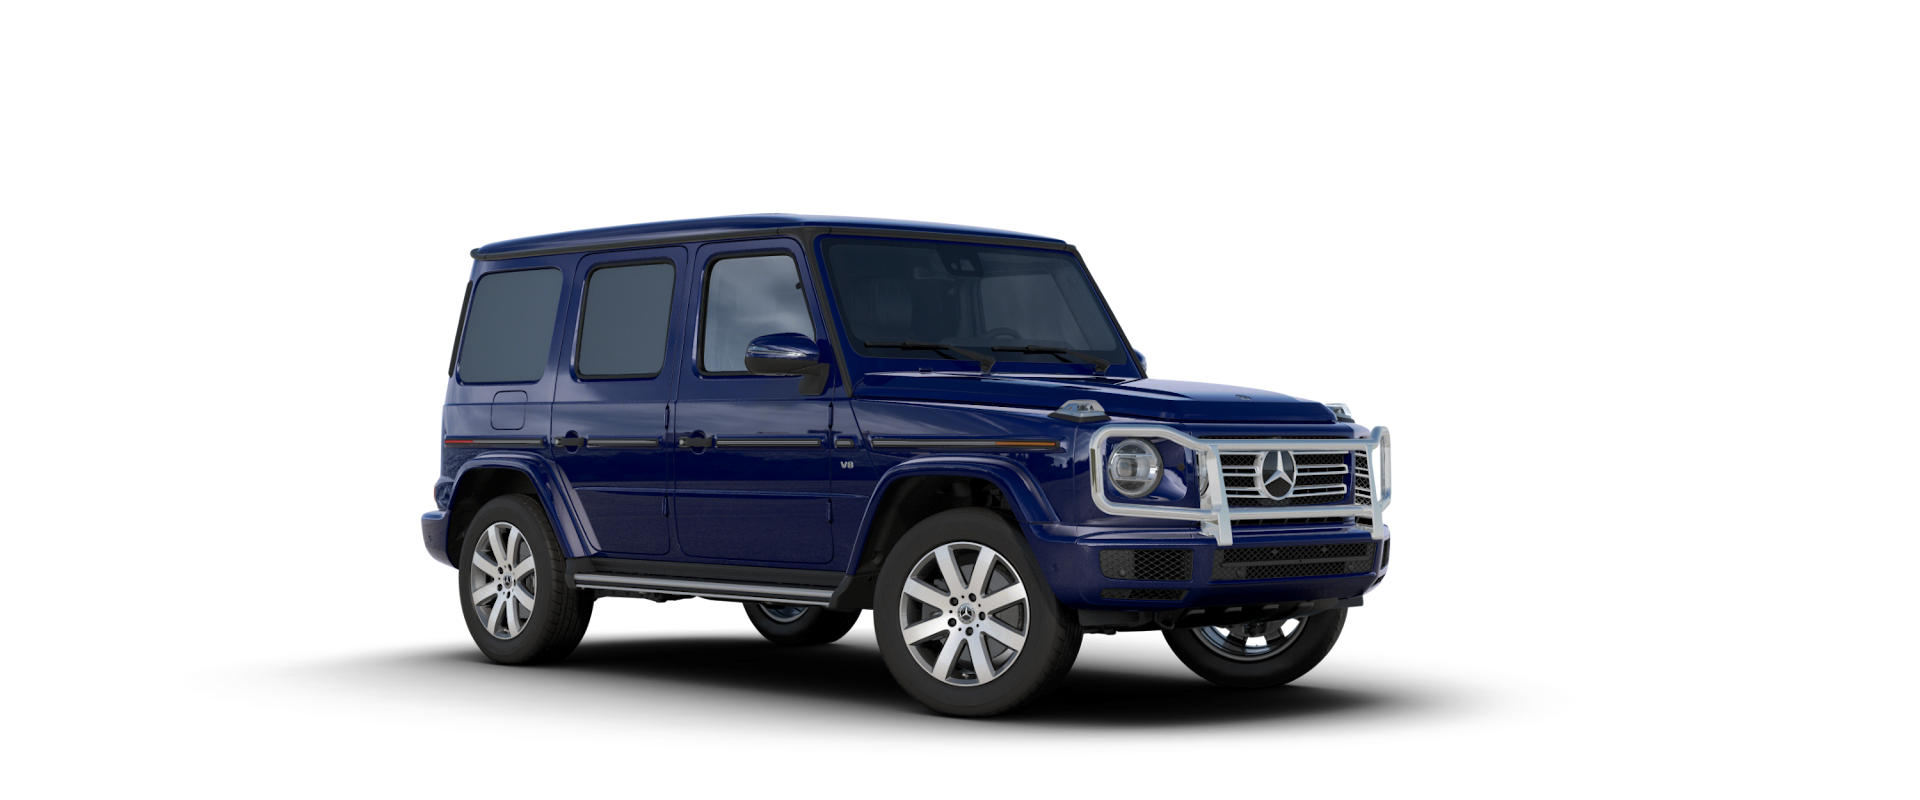 Blue Mercedes Suv PNG Clipart Background